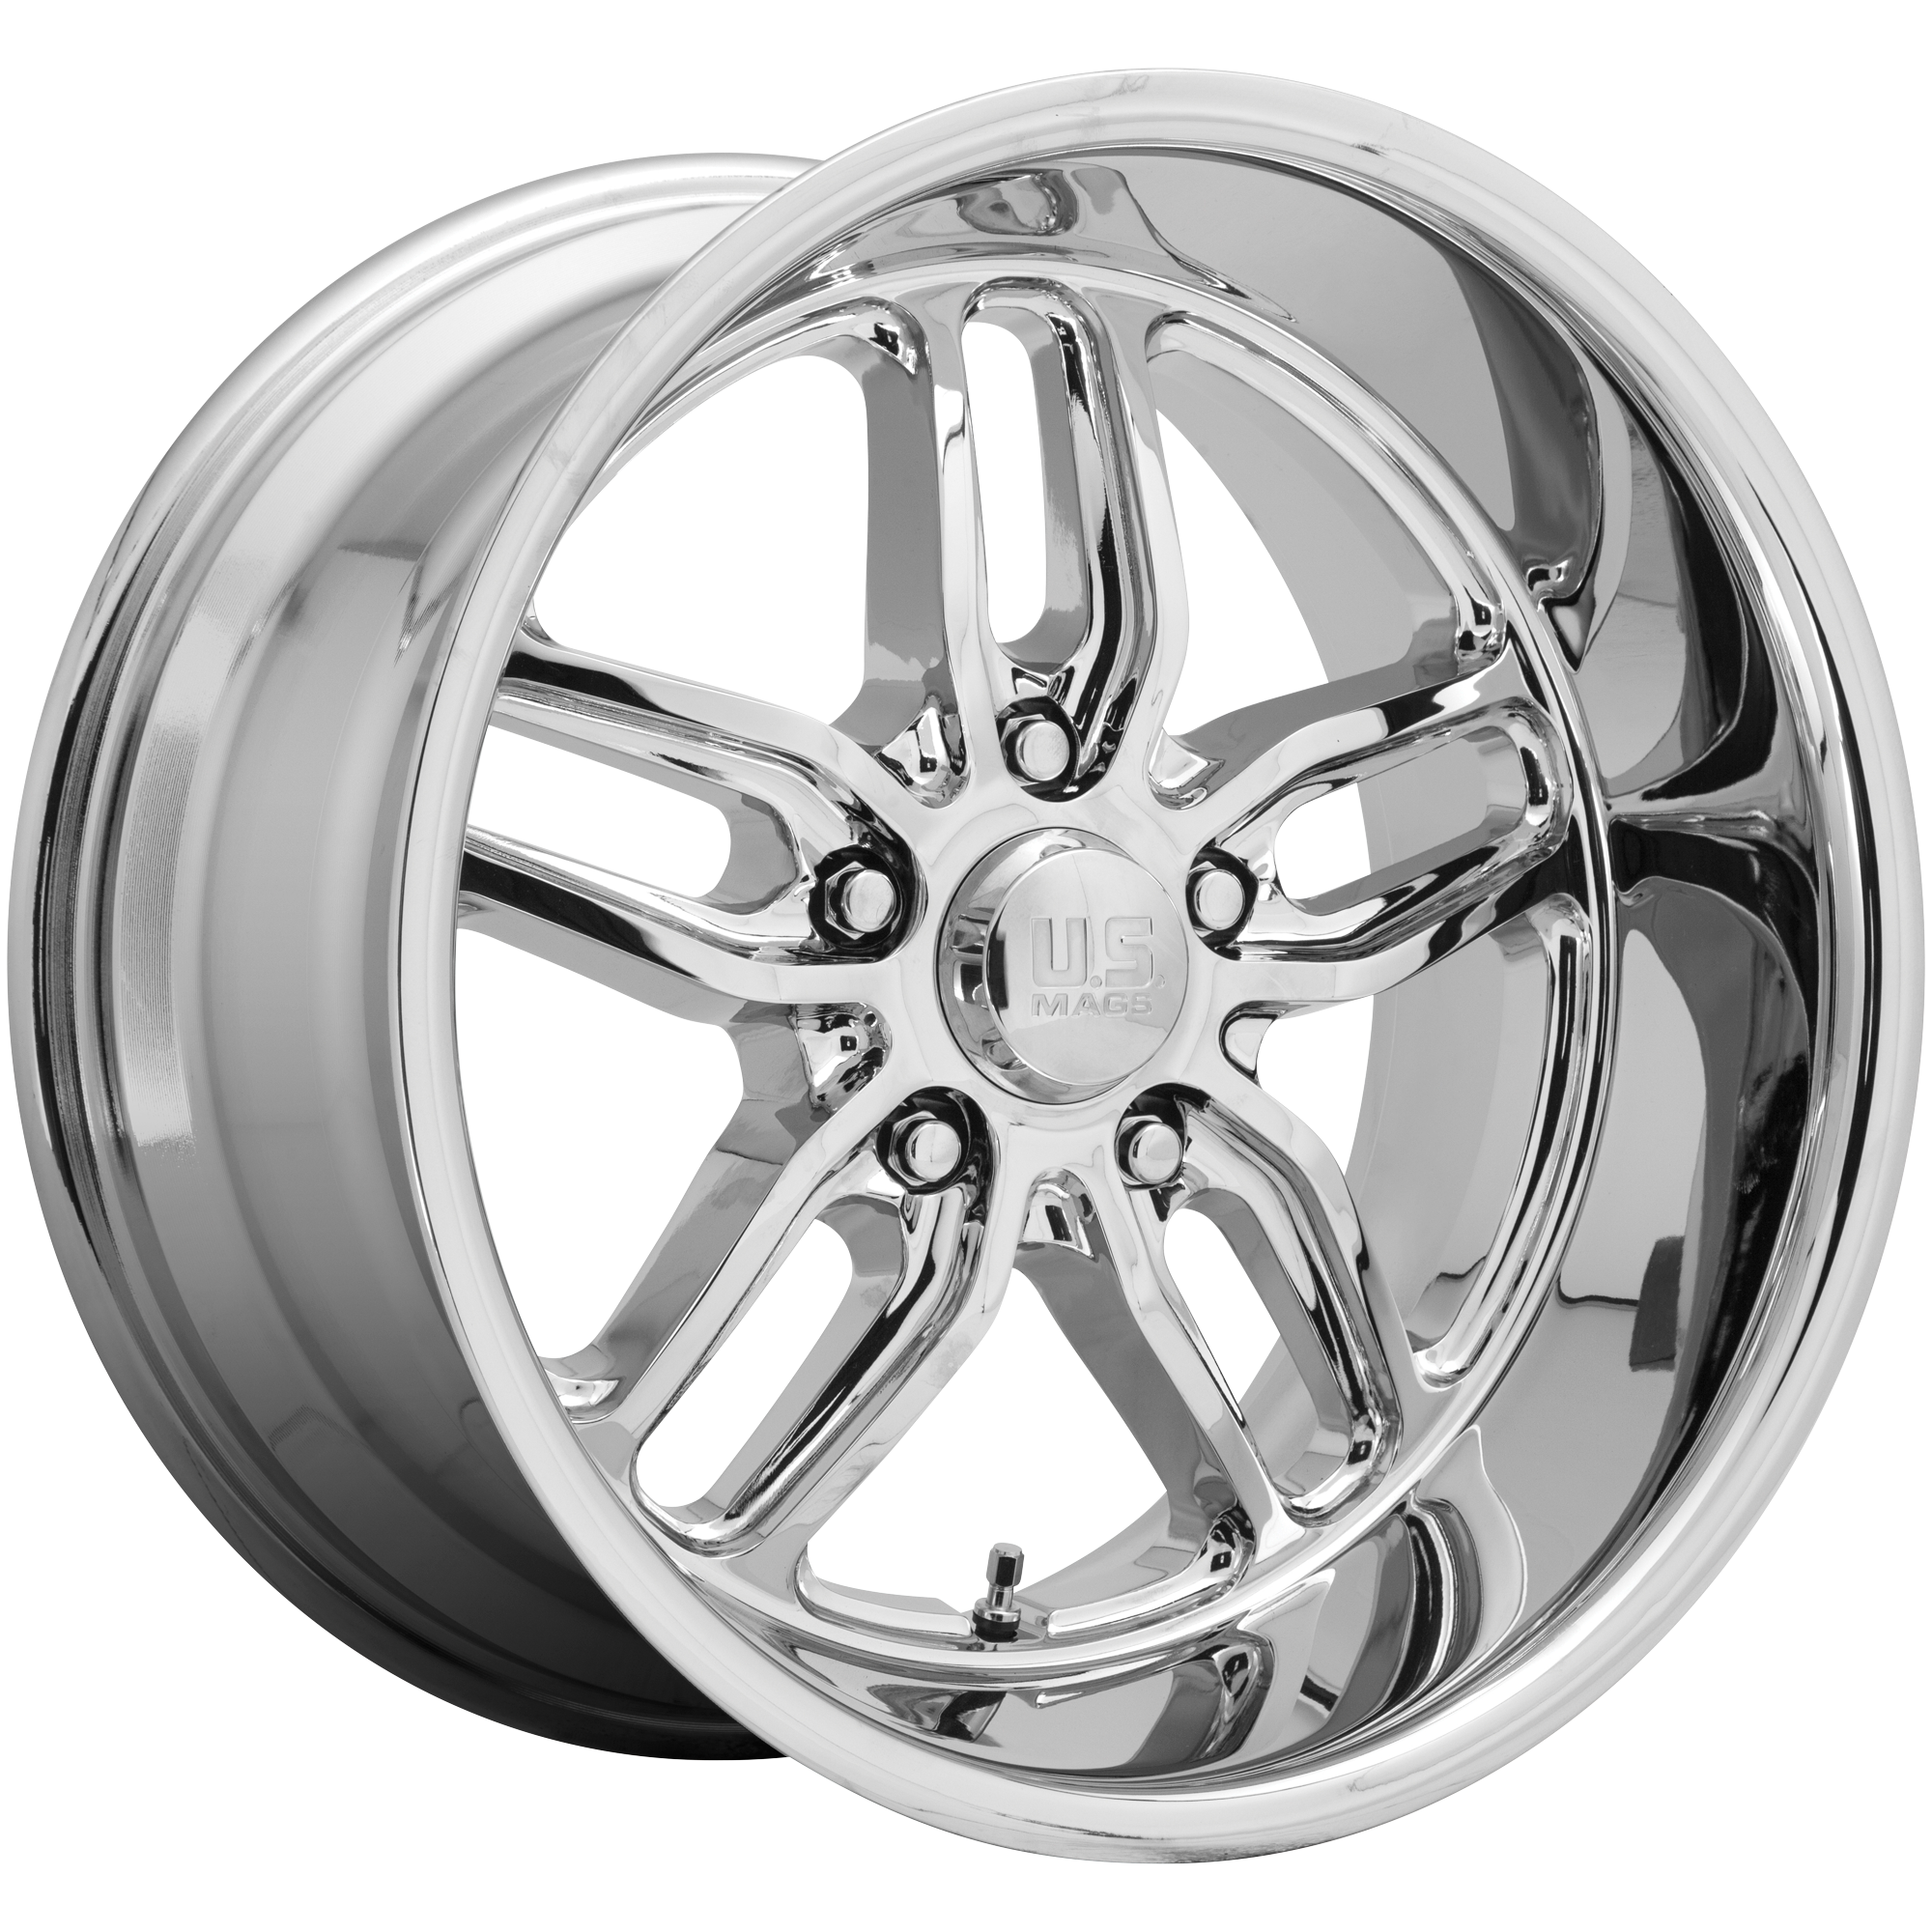 CTEN 18x8 5x120.65 CHROME PLATED (1 mm) - Tires and Engine Performance